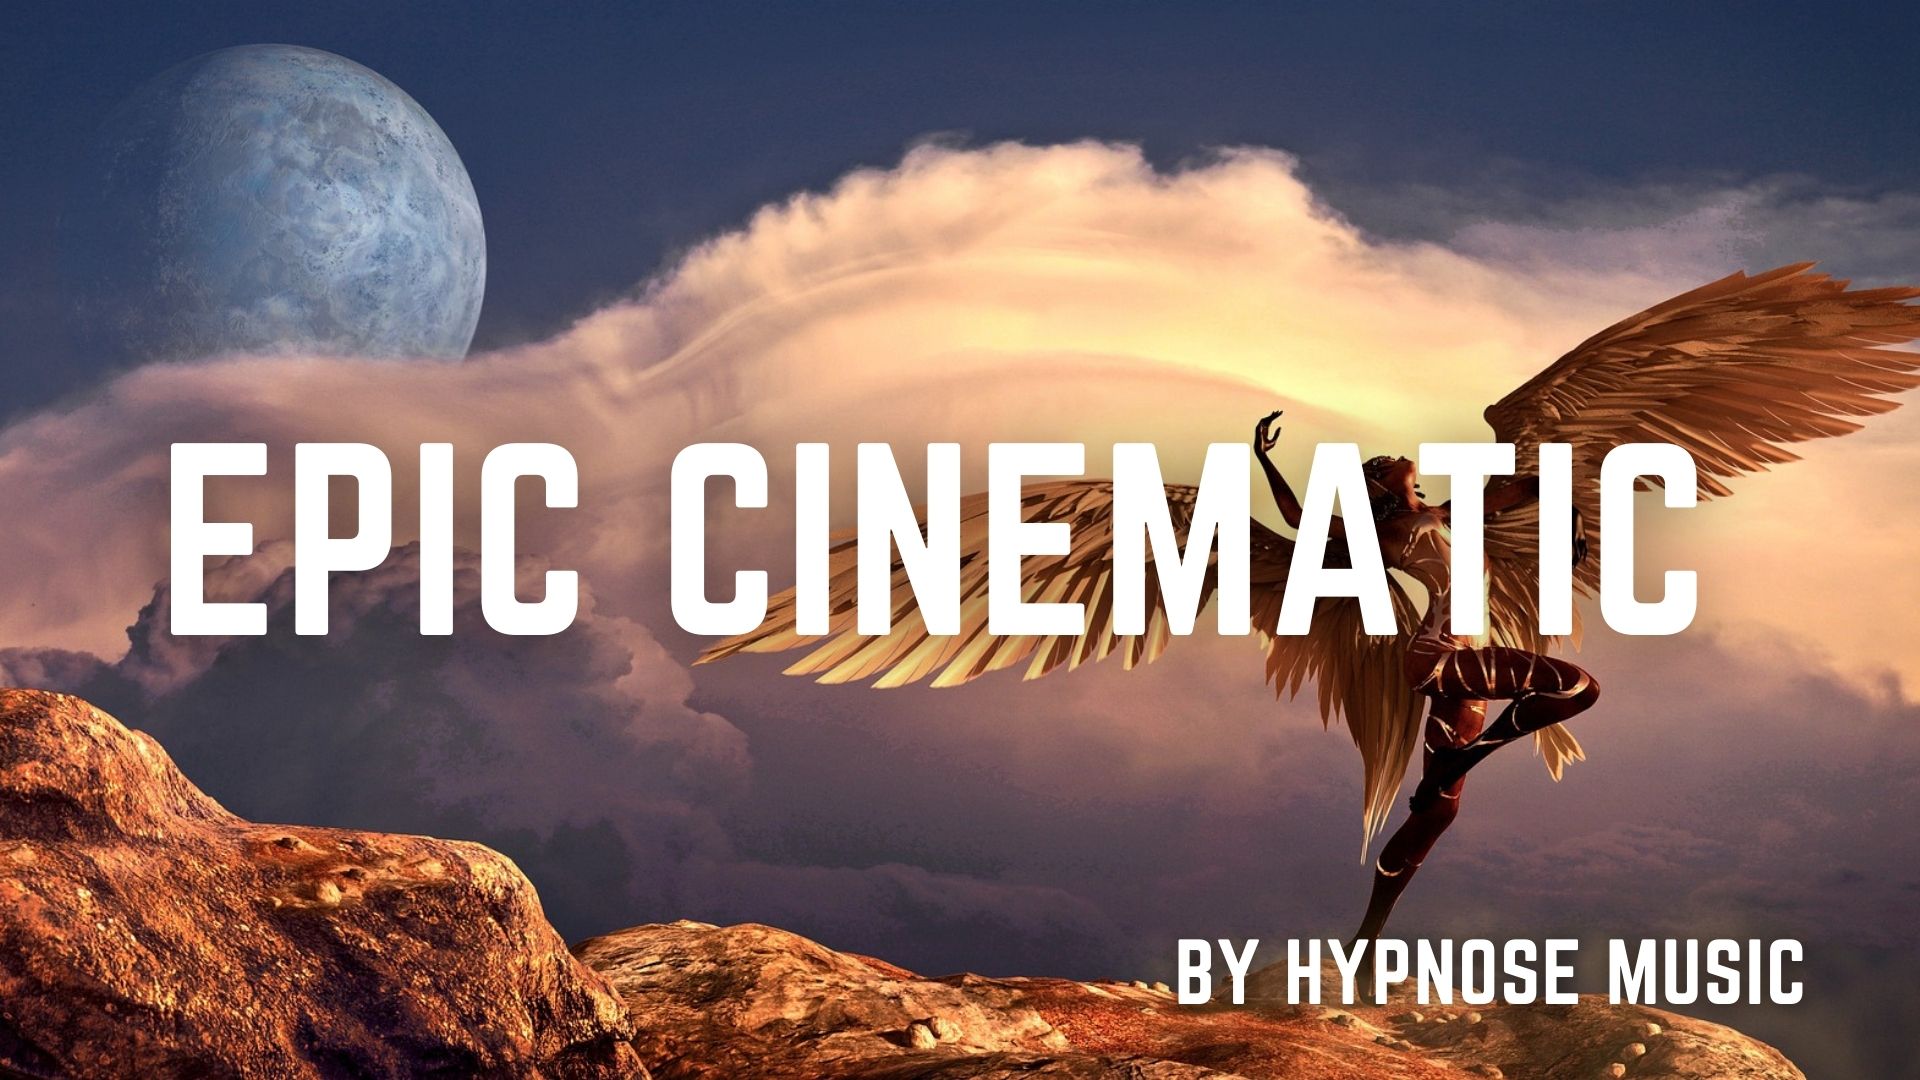 Mysterious Indian Background Music by HypnoseMusic | AudioJungle